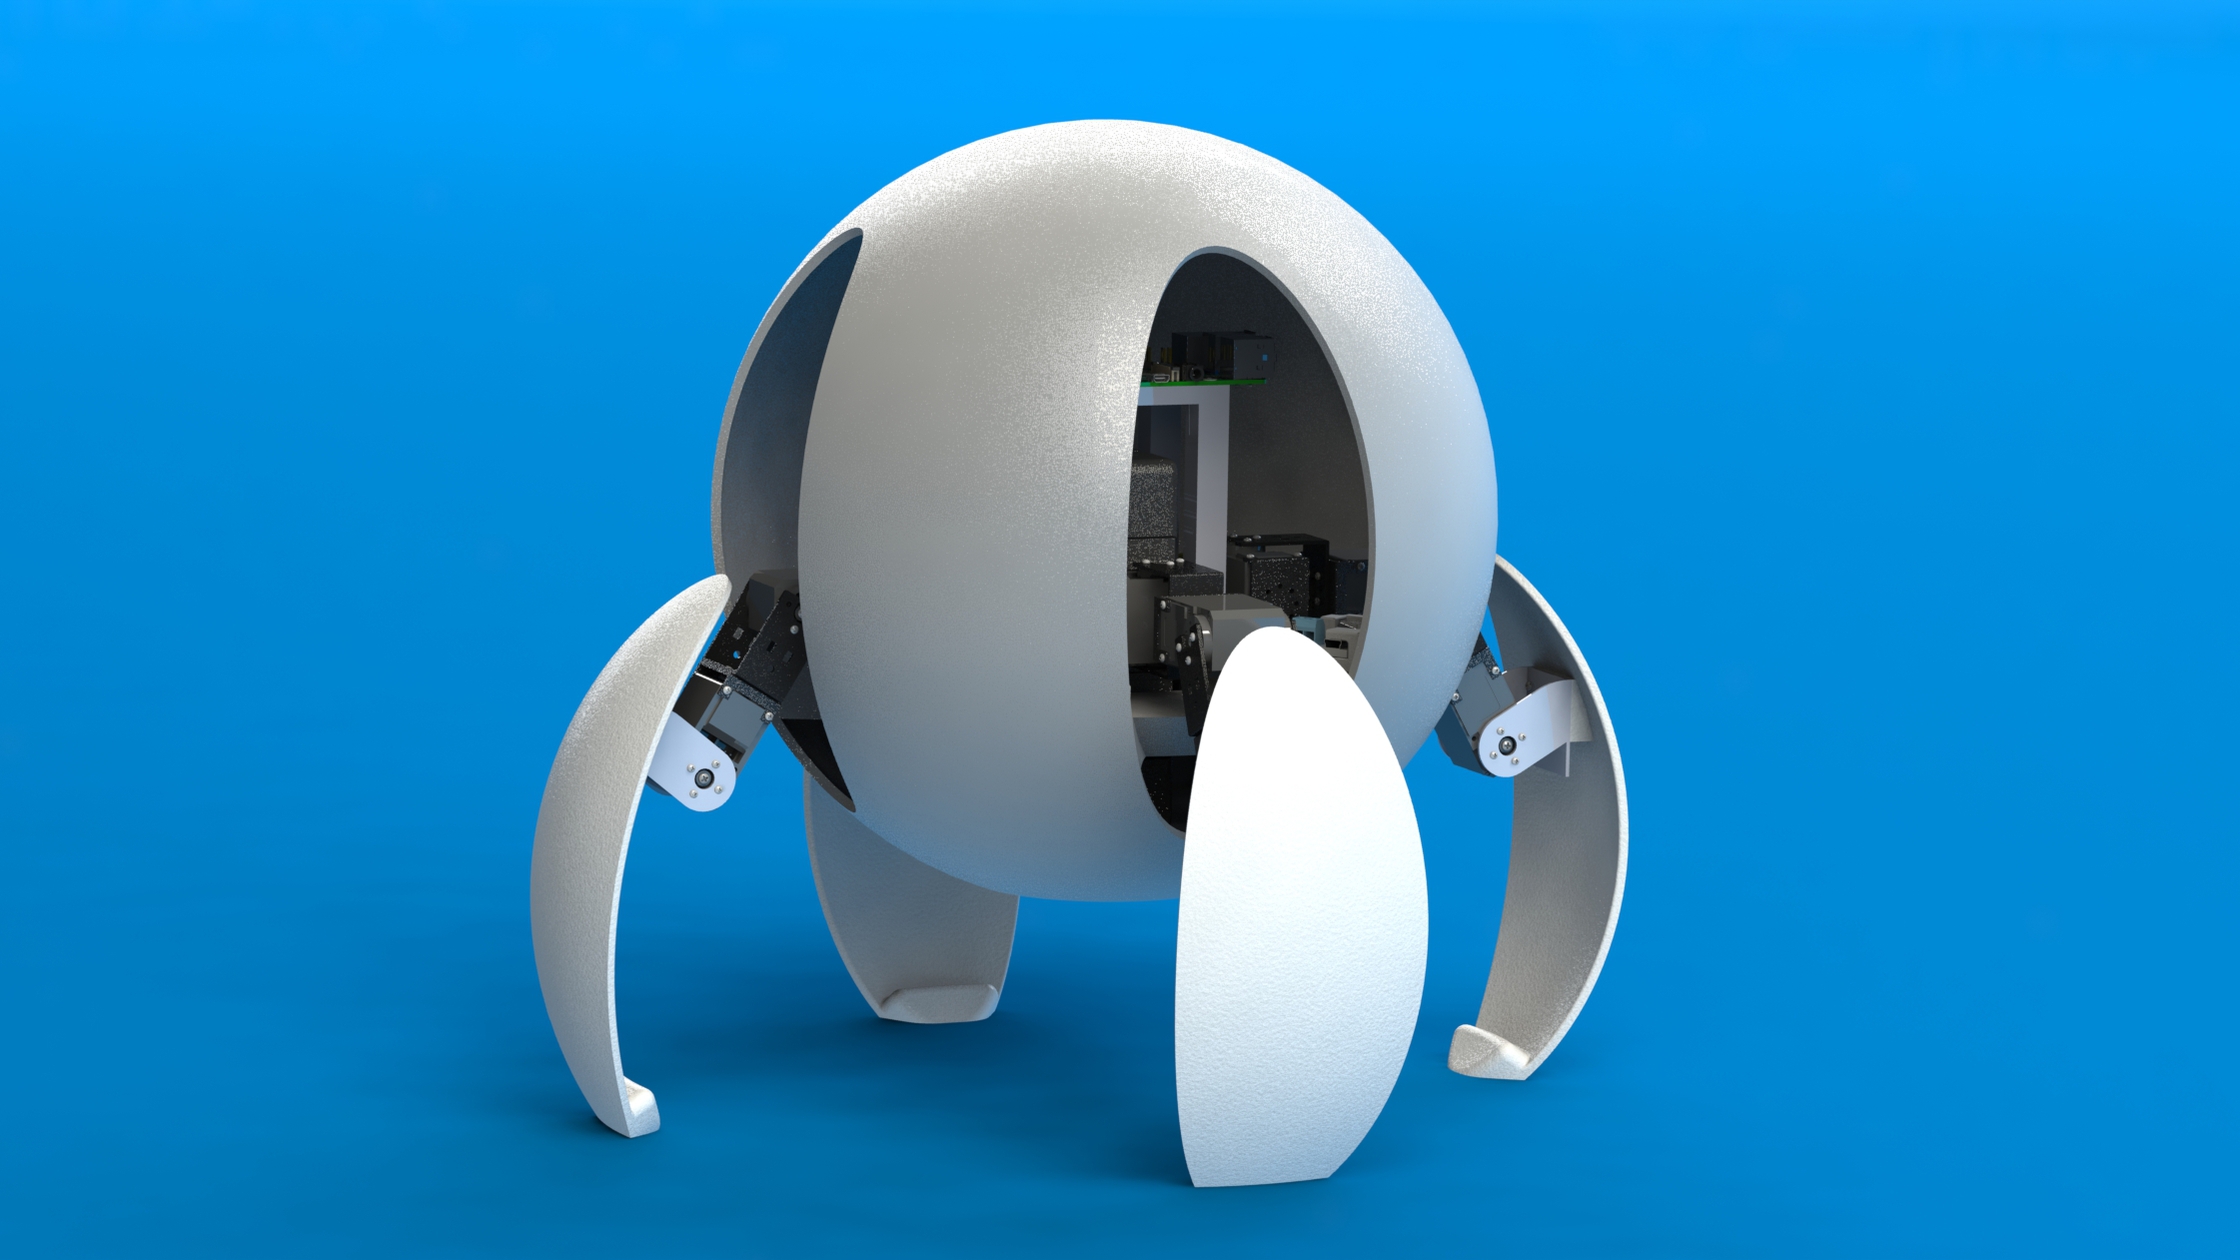 A CAD mockup of a four-legged spherical robot. When hovering your mouse over this image, a GIF plays of Spencer holding one leg of this robot as it moves through a crawling walk cycle.